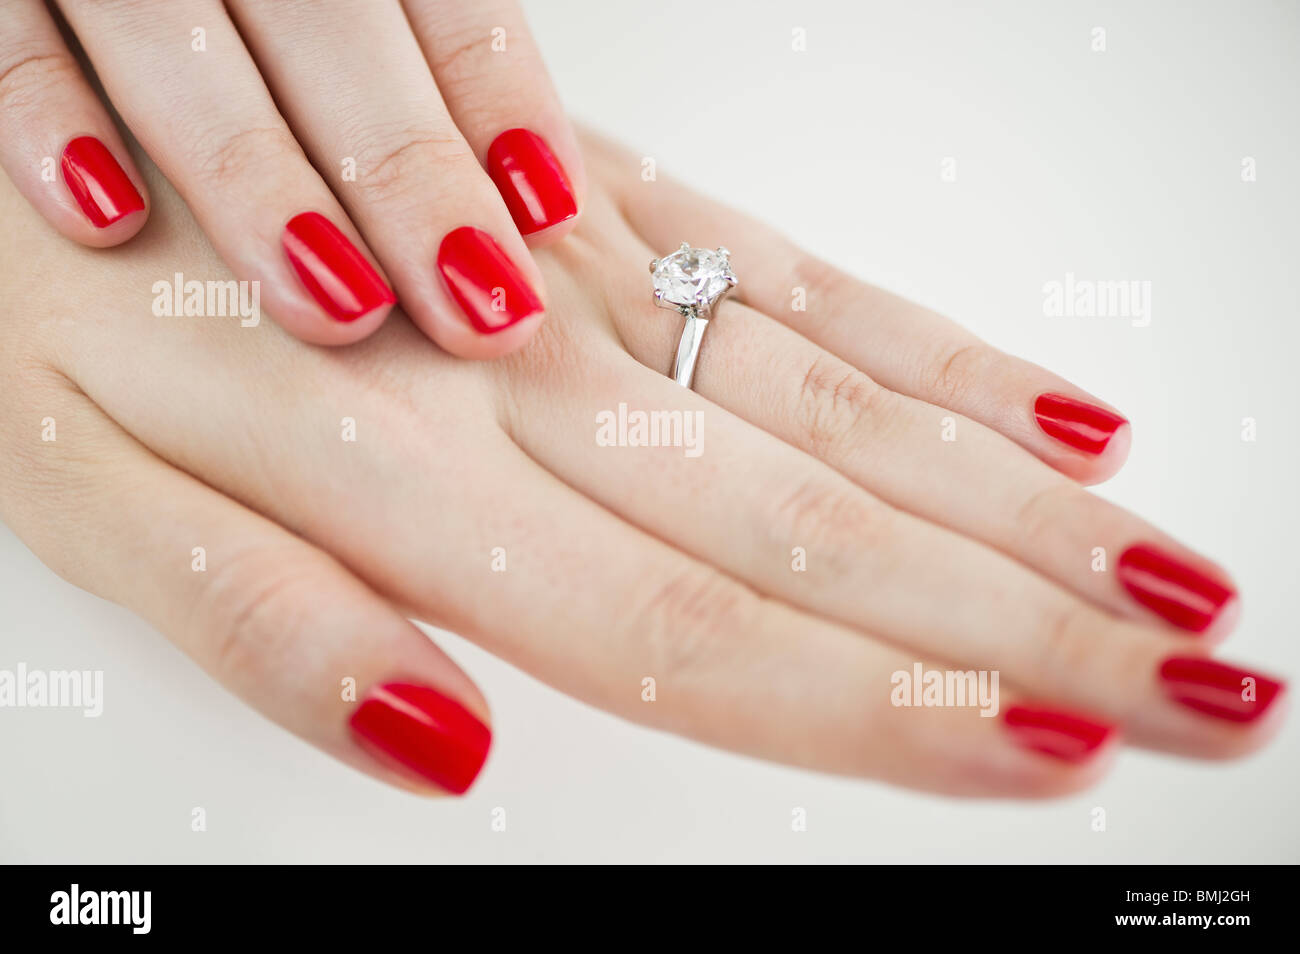 Diamond engagement ring on hands with red nail polish Stock Photo